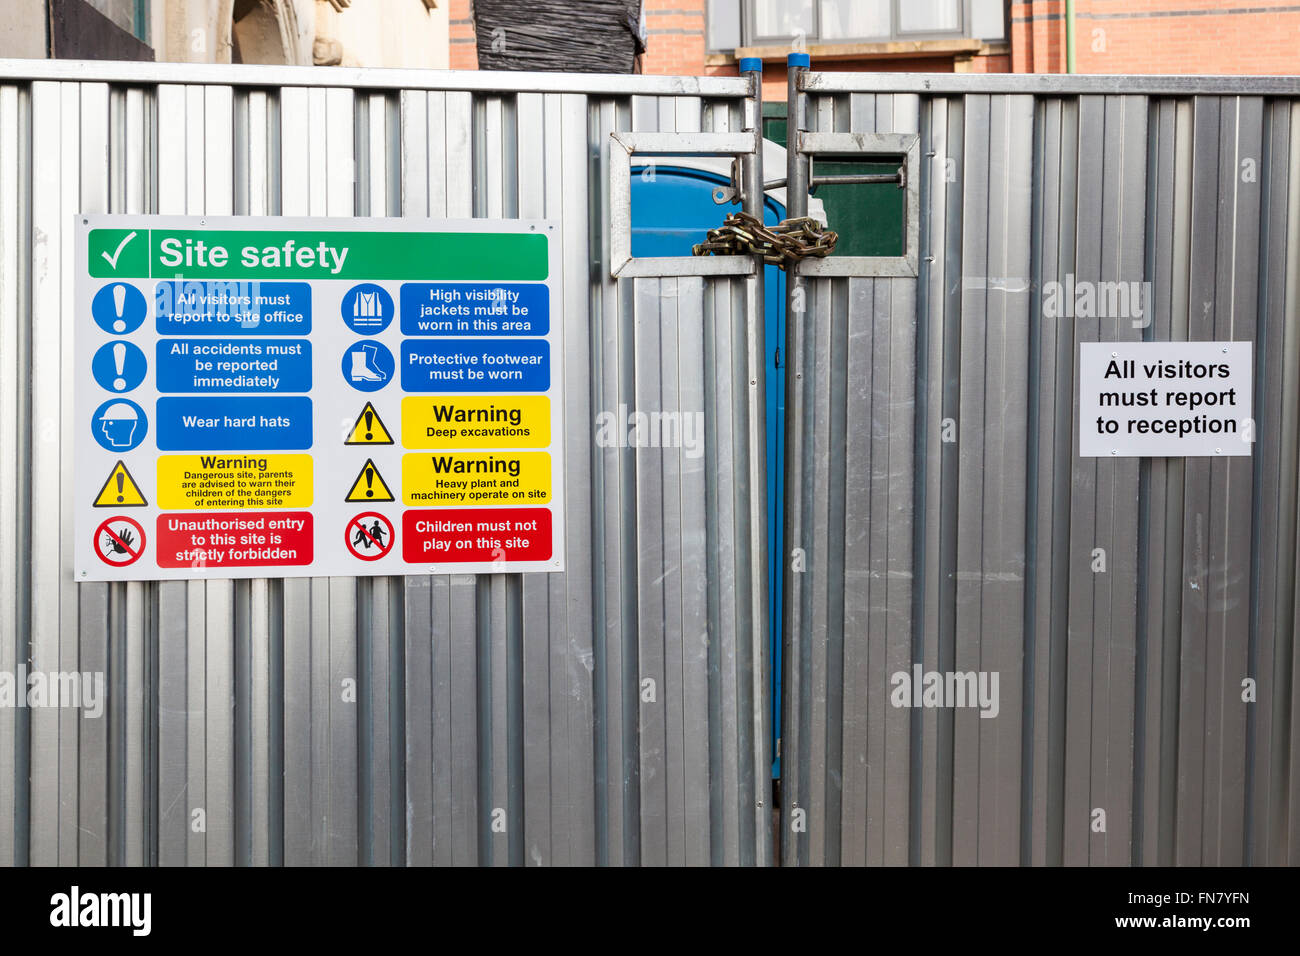 Site safety notices on construction site fencing, Nottingham, England, UK Stock Photo